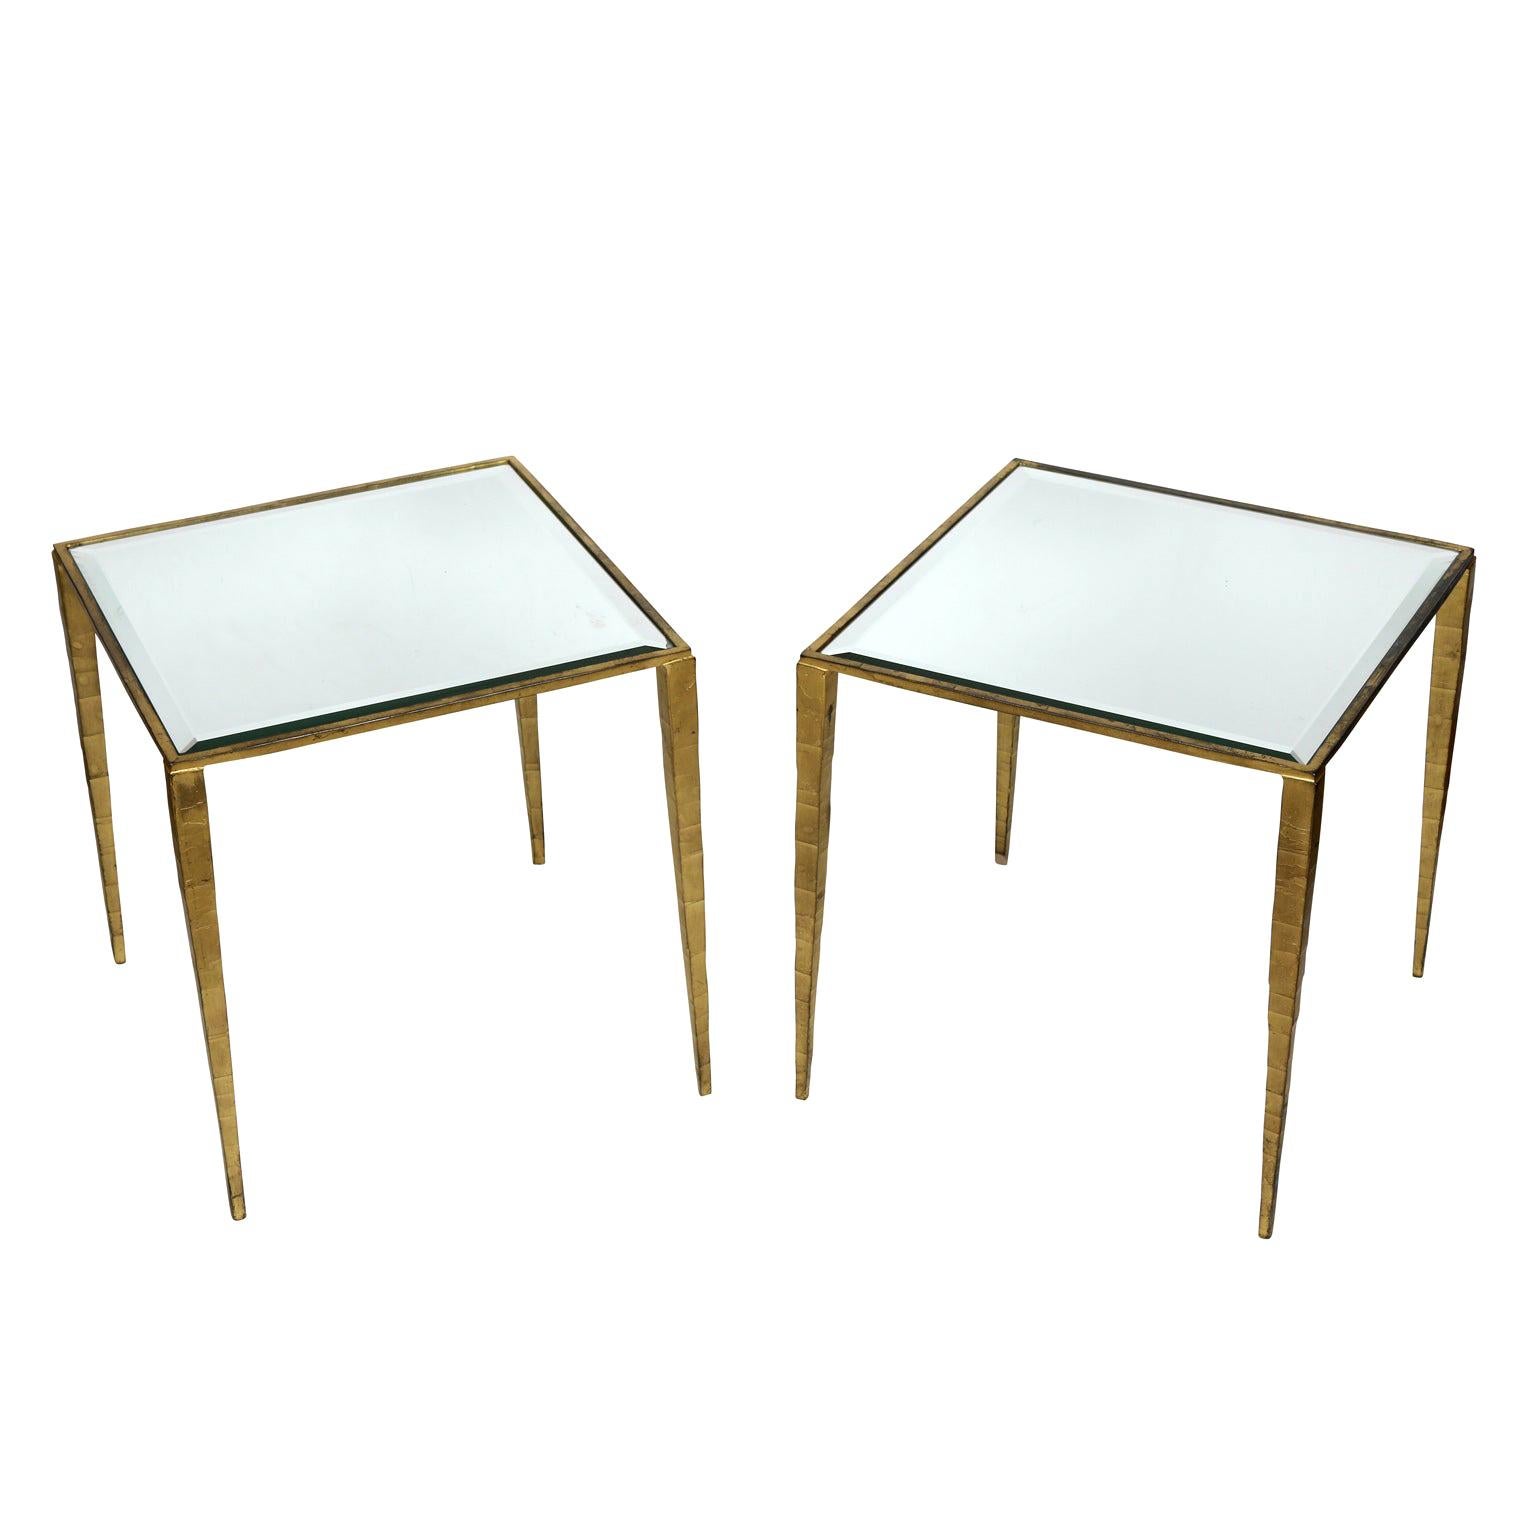 Pair of Gilt Metal Side Tables with Mirror Tops